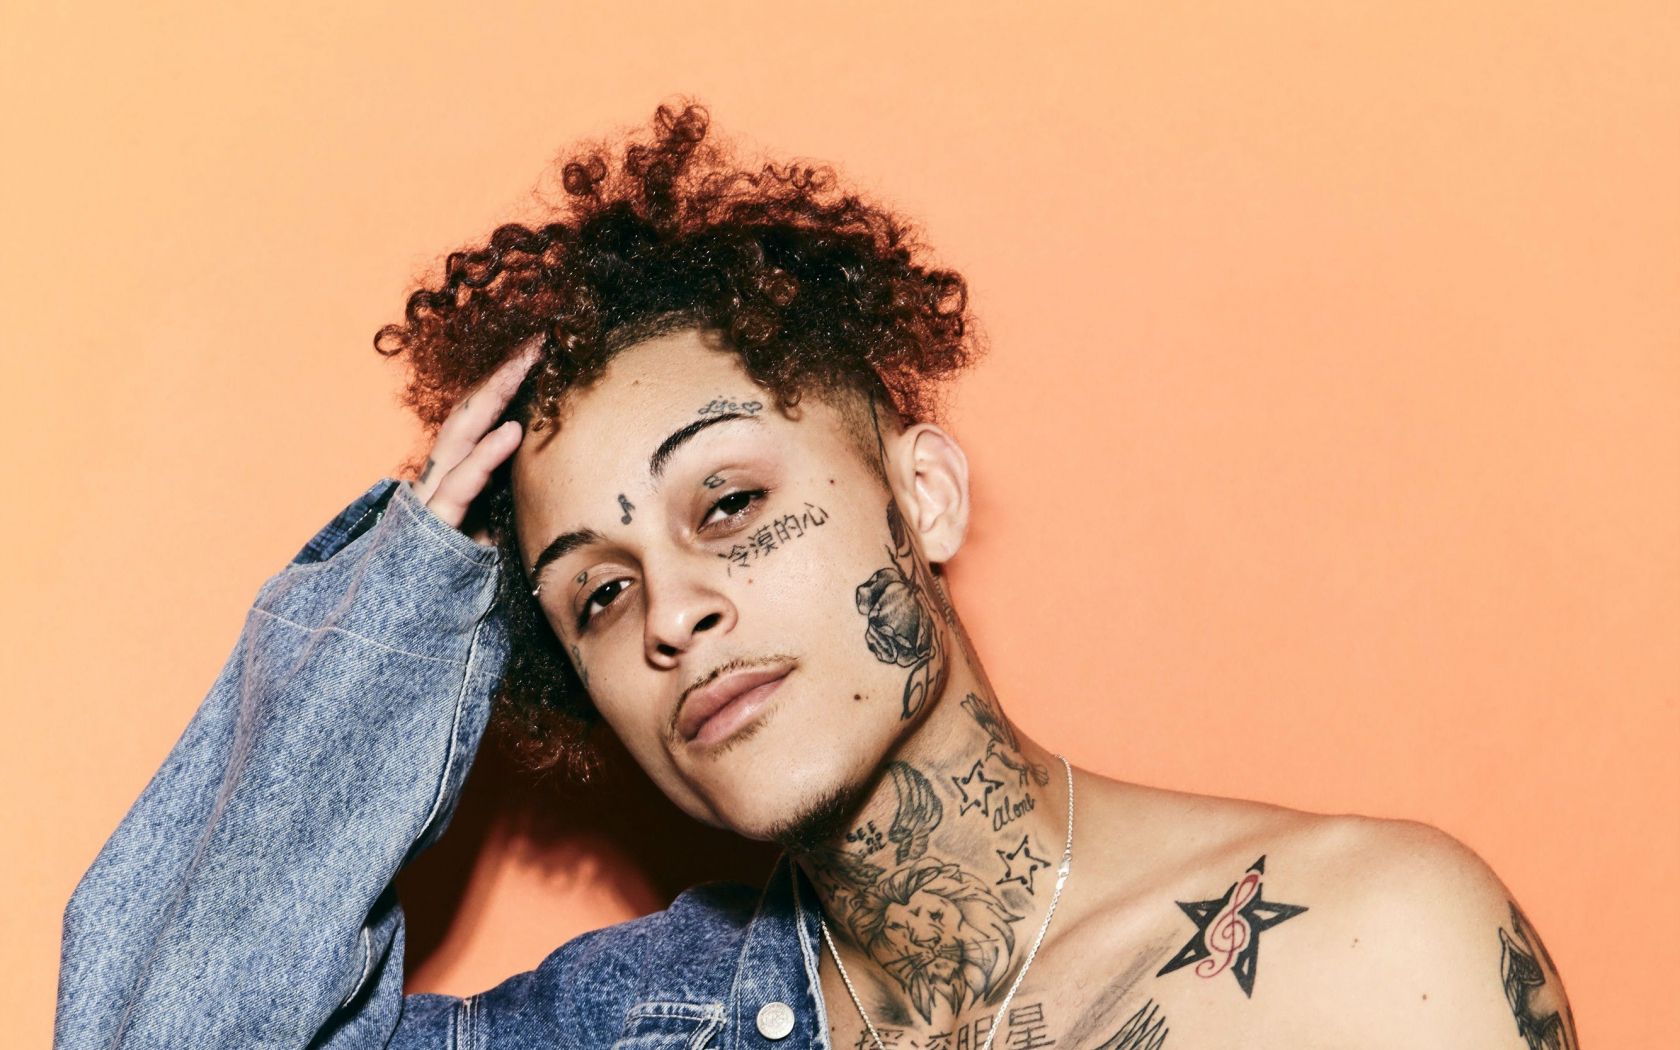 Free download Lil Skies Announces First Ever Headlining Tour AllHipHopcom [2667x1842] for your Desktop, Mobile & Tablet. Explore Lil Skies Wallpaper. Lil Skies Wallpaper, Lil Skies Albums Wallpaper, Dark Skies Wallpaper